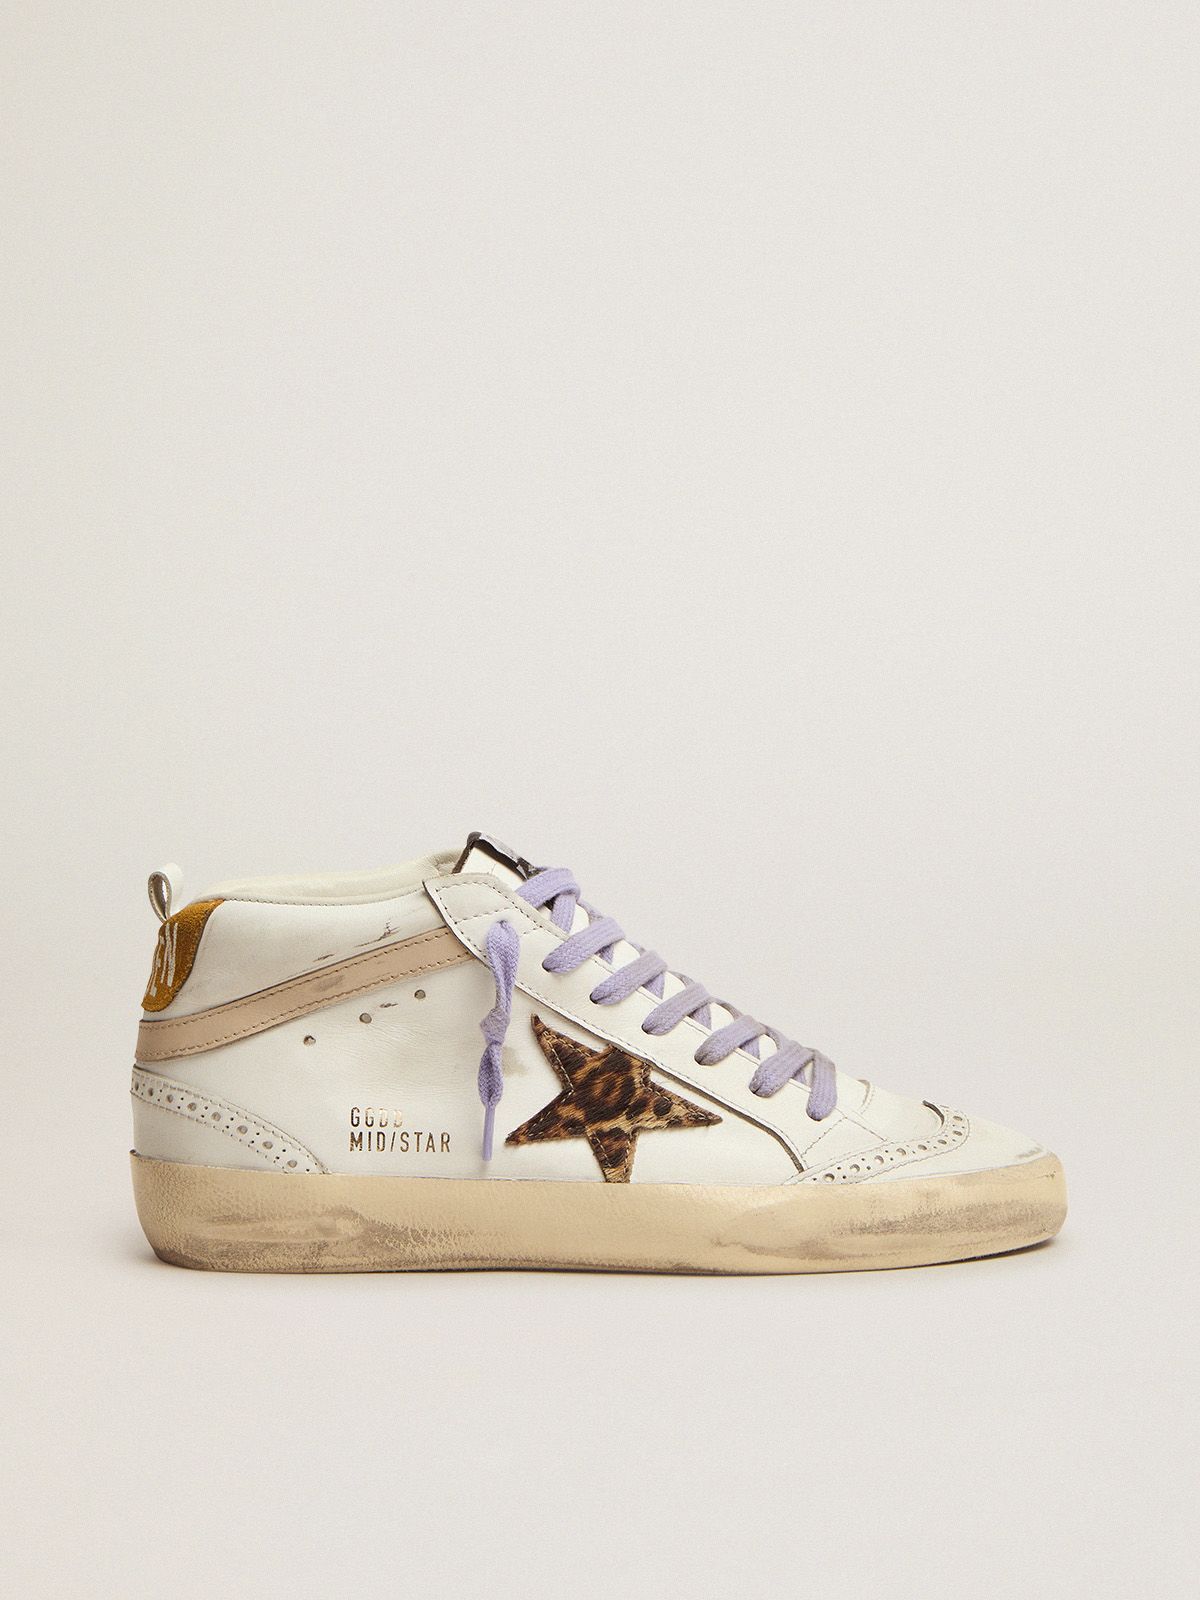 golden goose orange tab light heel skin suede sneakers leopard-print star Star pony Mid and with